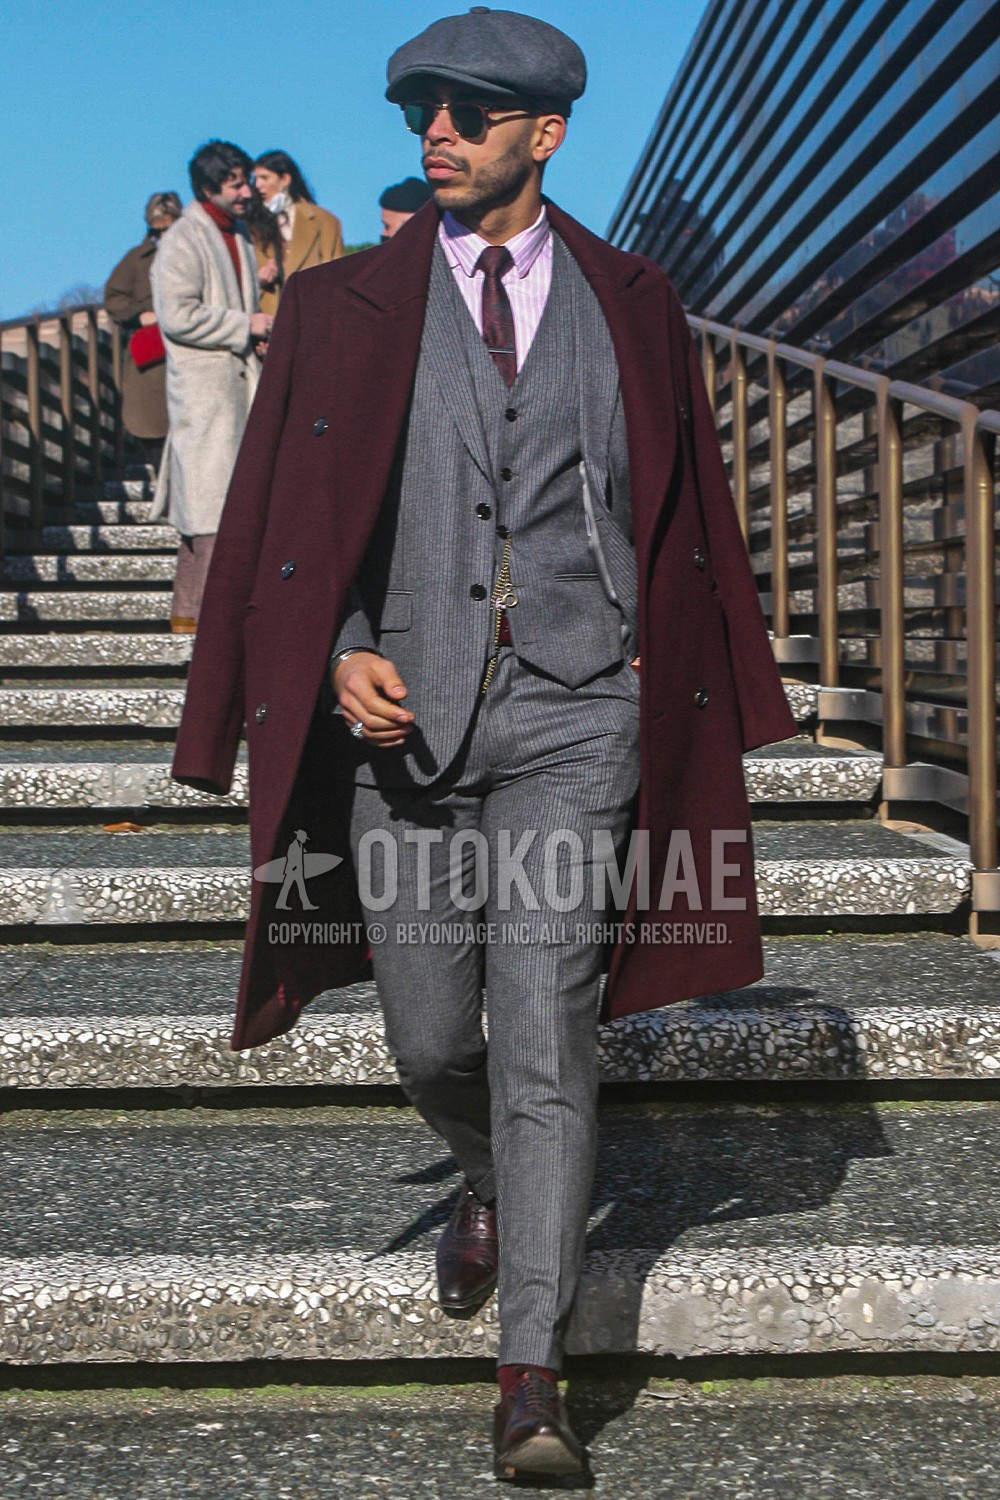 Men's spring winter outfit with gray plain hunting cap, brown plain sunglasses, red plain ulster coat, pink stripes shirt, brown brogue shoes leather shoes, gray stripes three-piece suit, red necktie necktie.